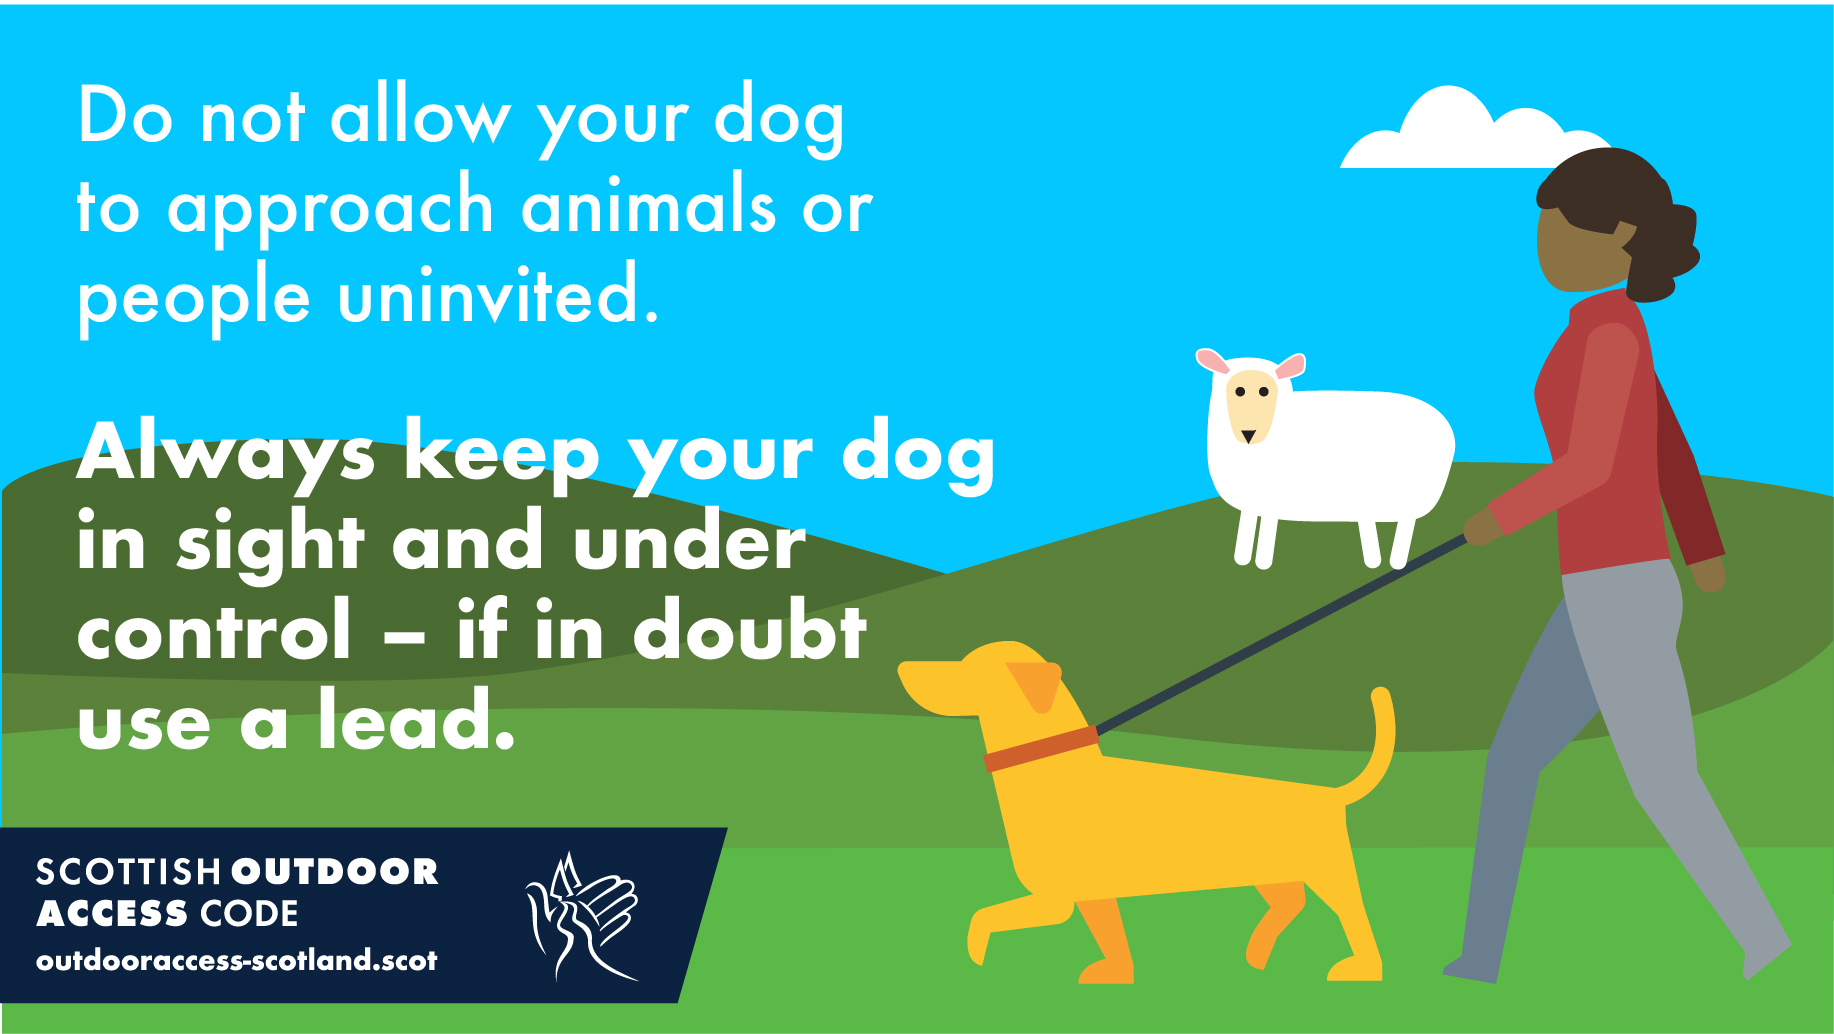 Don't allow your dog to approach animals or people uninvited. Always keep your dog in sight and under control. If in doubt use a lead